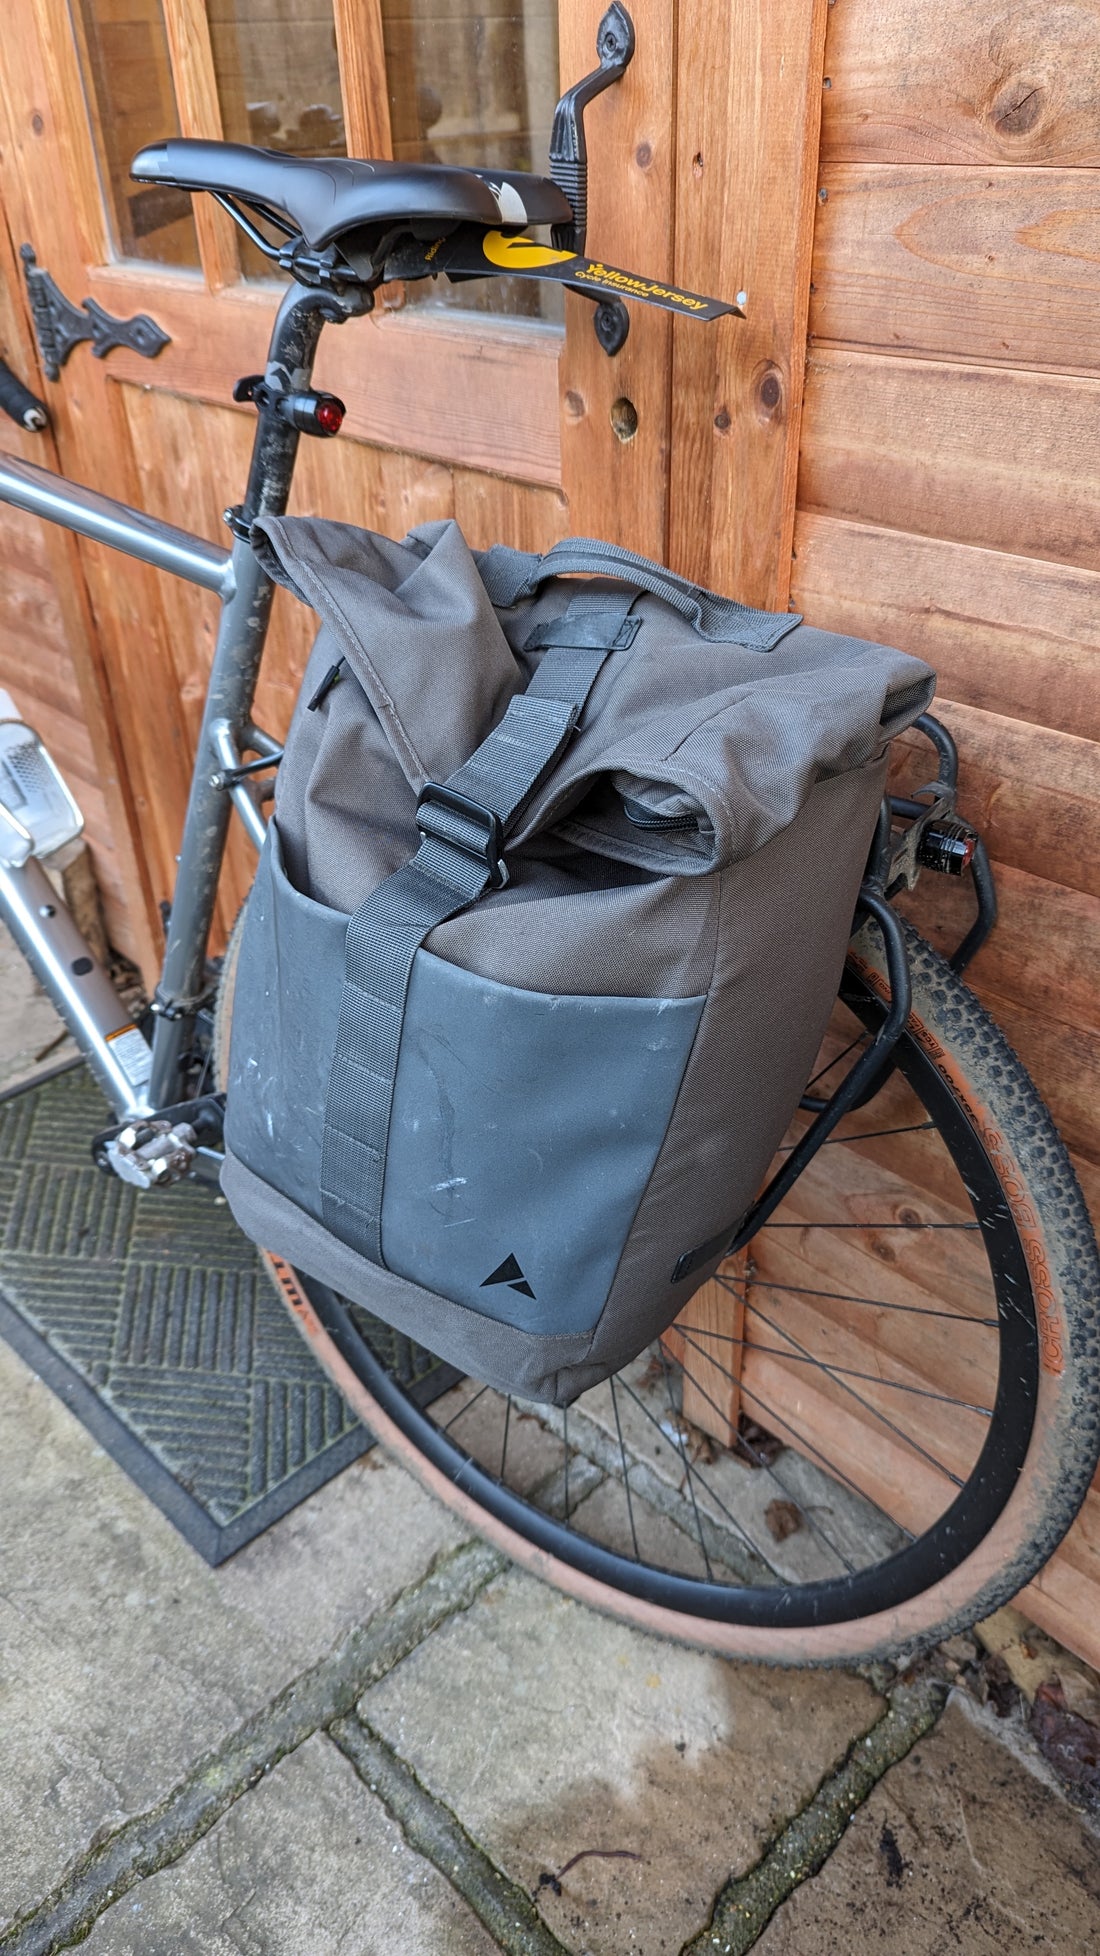 From rucksack to pannier bag for my bike commute to work